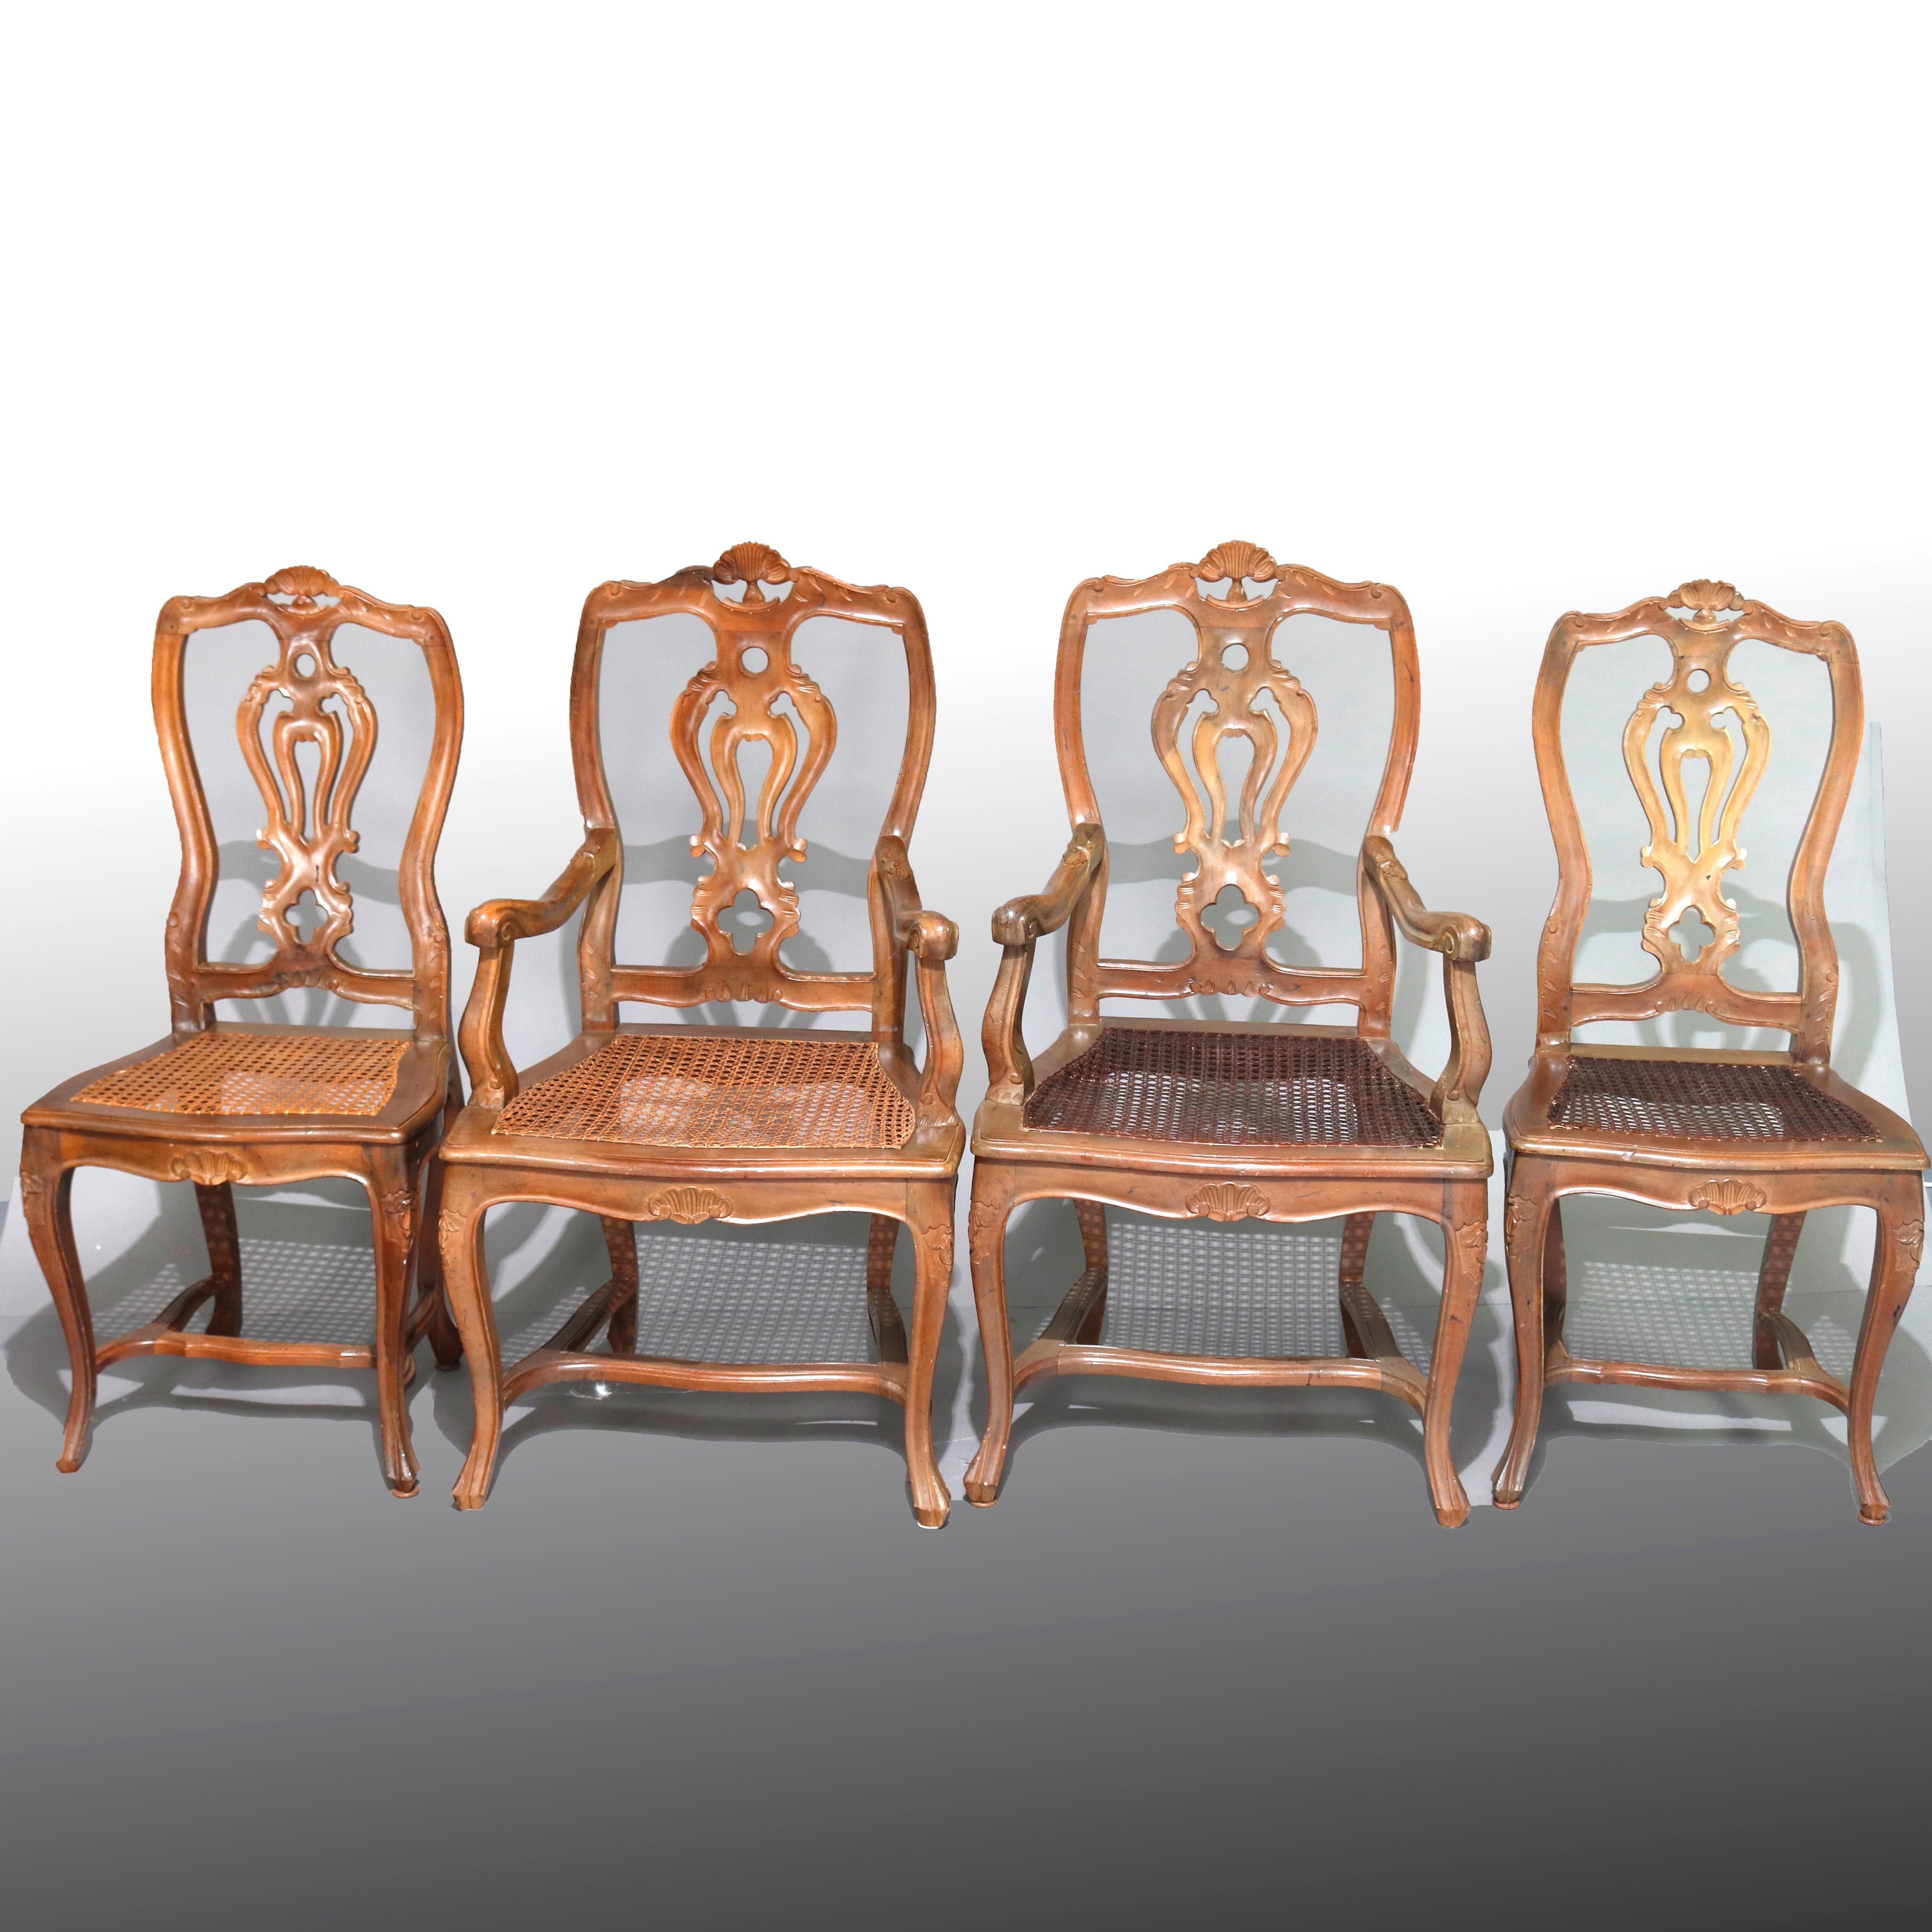 Eight Italian Renaissance Revival Carved Fruitwood and Caned Dining Chairs 5